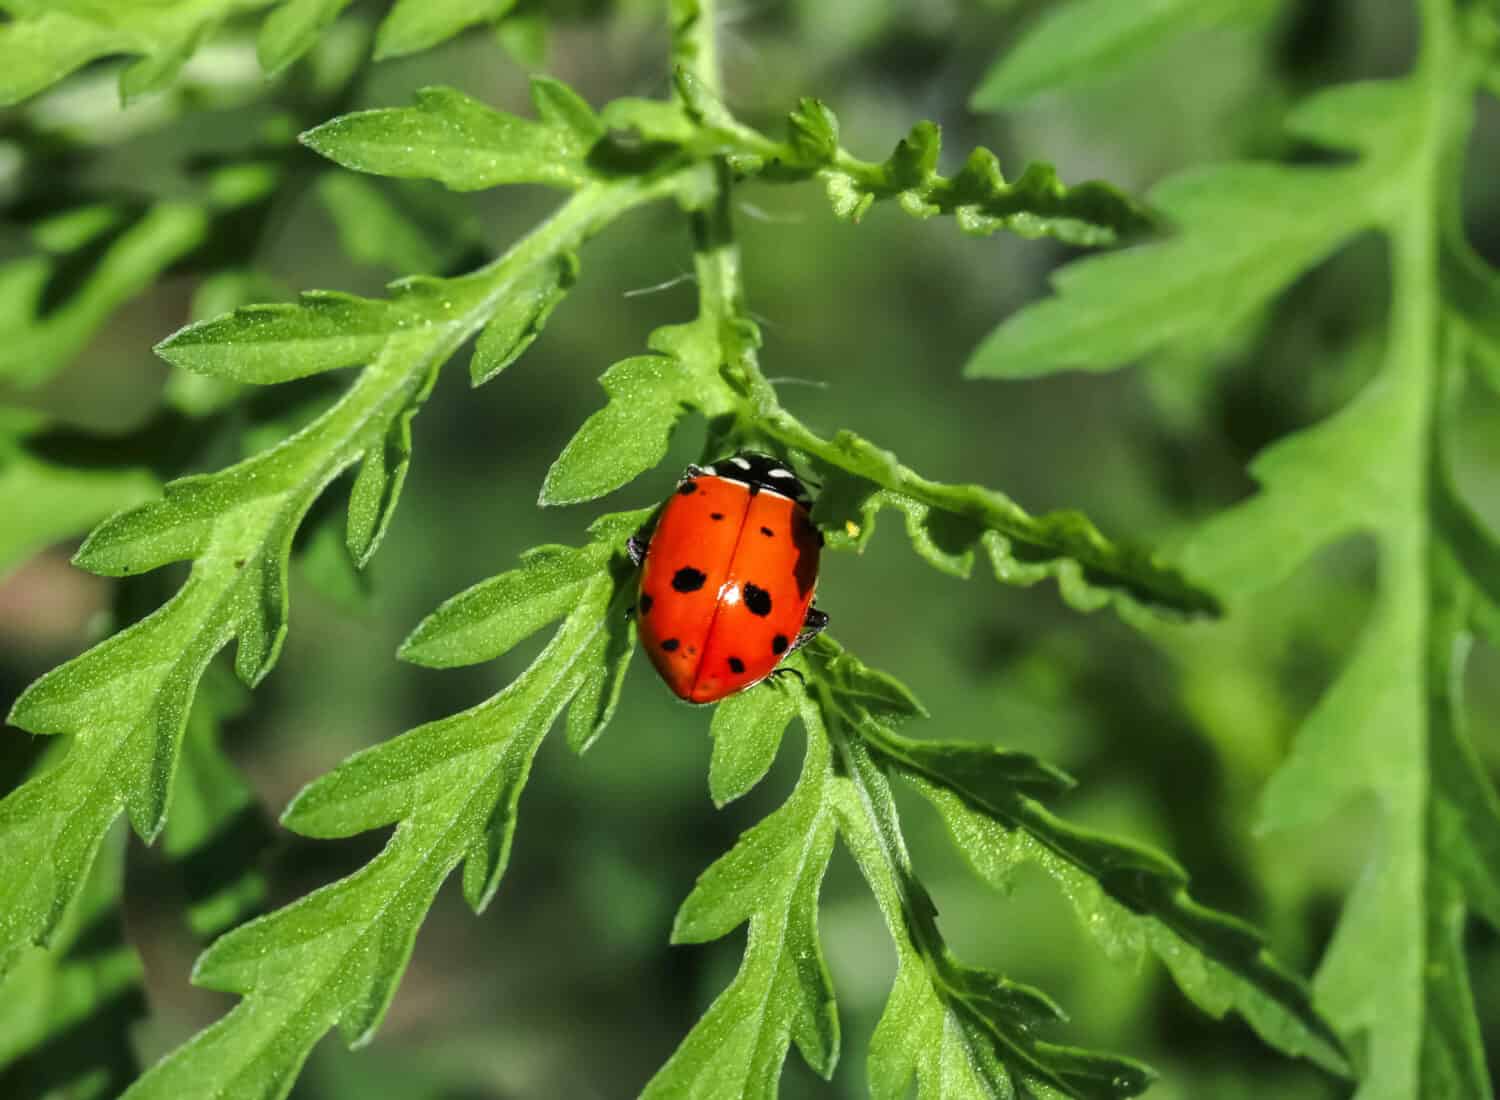 Hippodamia convergen or commonly known as as the Convergent Ladybug.